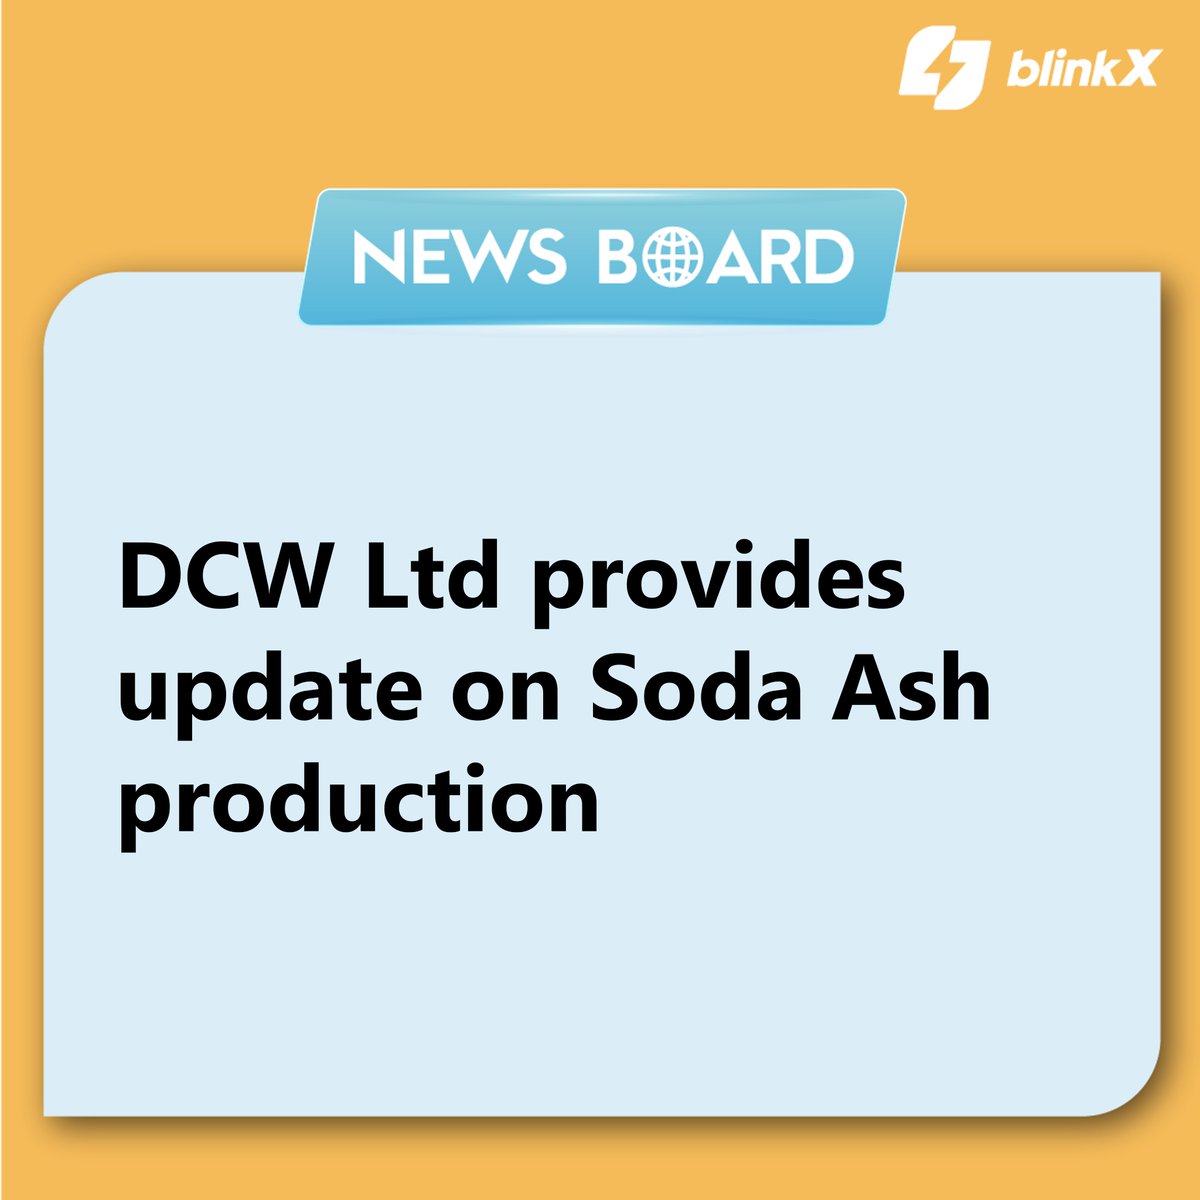 DCW Ltd has issued an update regarding the restoration of soda ash production following a mechanical breakdown of the CO2 gas compressor in its Soda Ash Plant...

Read more at: blinkx.in/news/company/d…

#DCW #Chemical #SodaAsh #SpecialityChemicals #StockToWatch #sharemarket…